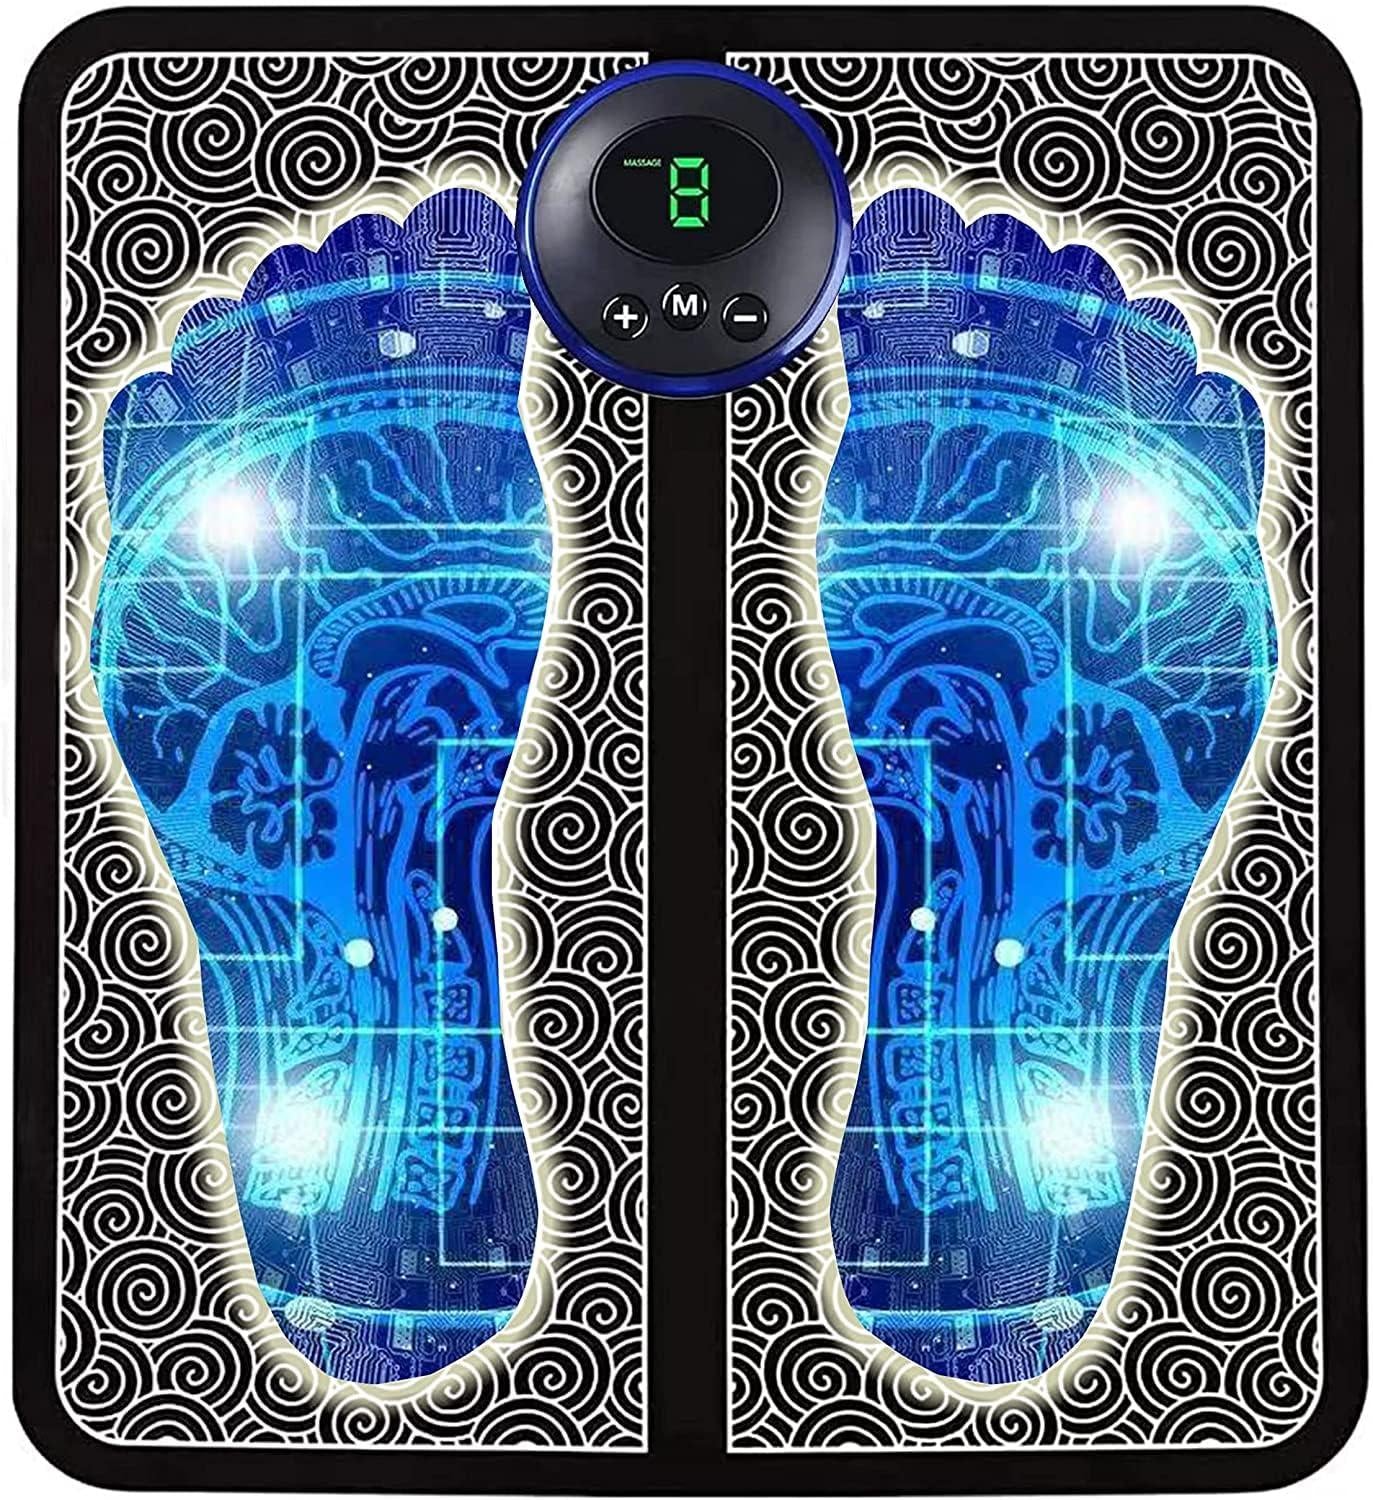 Foot Relaxer (8 Massage Modes With 19 Intensity Levels)